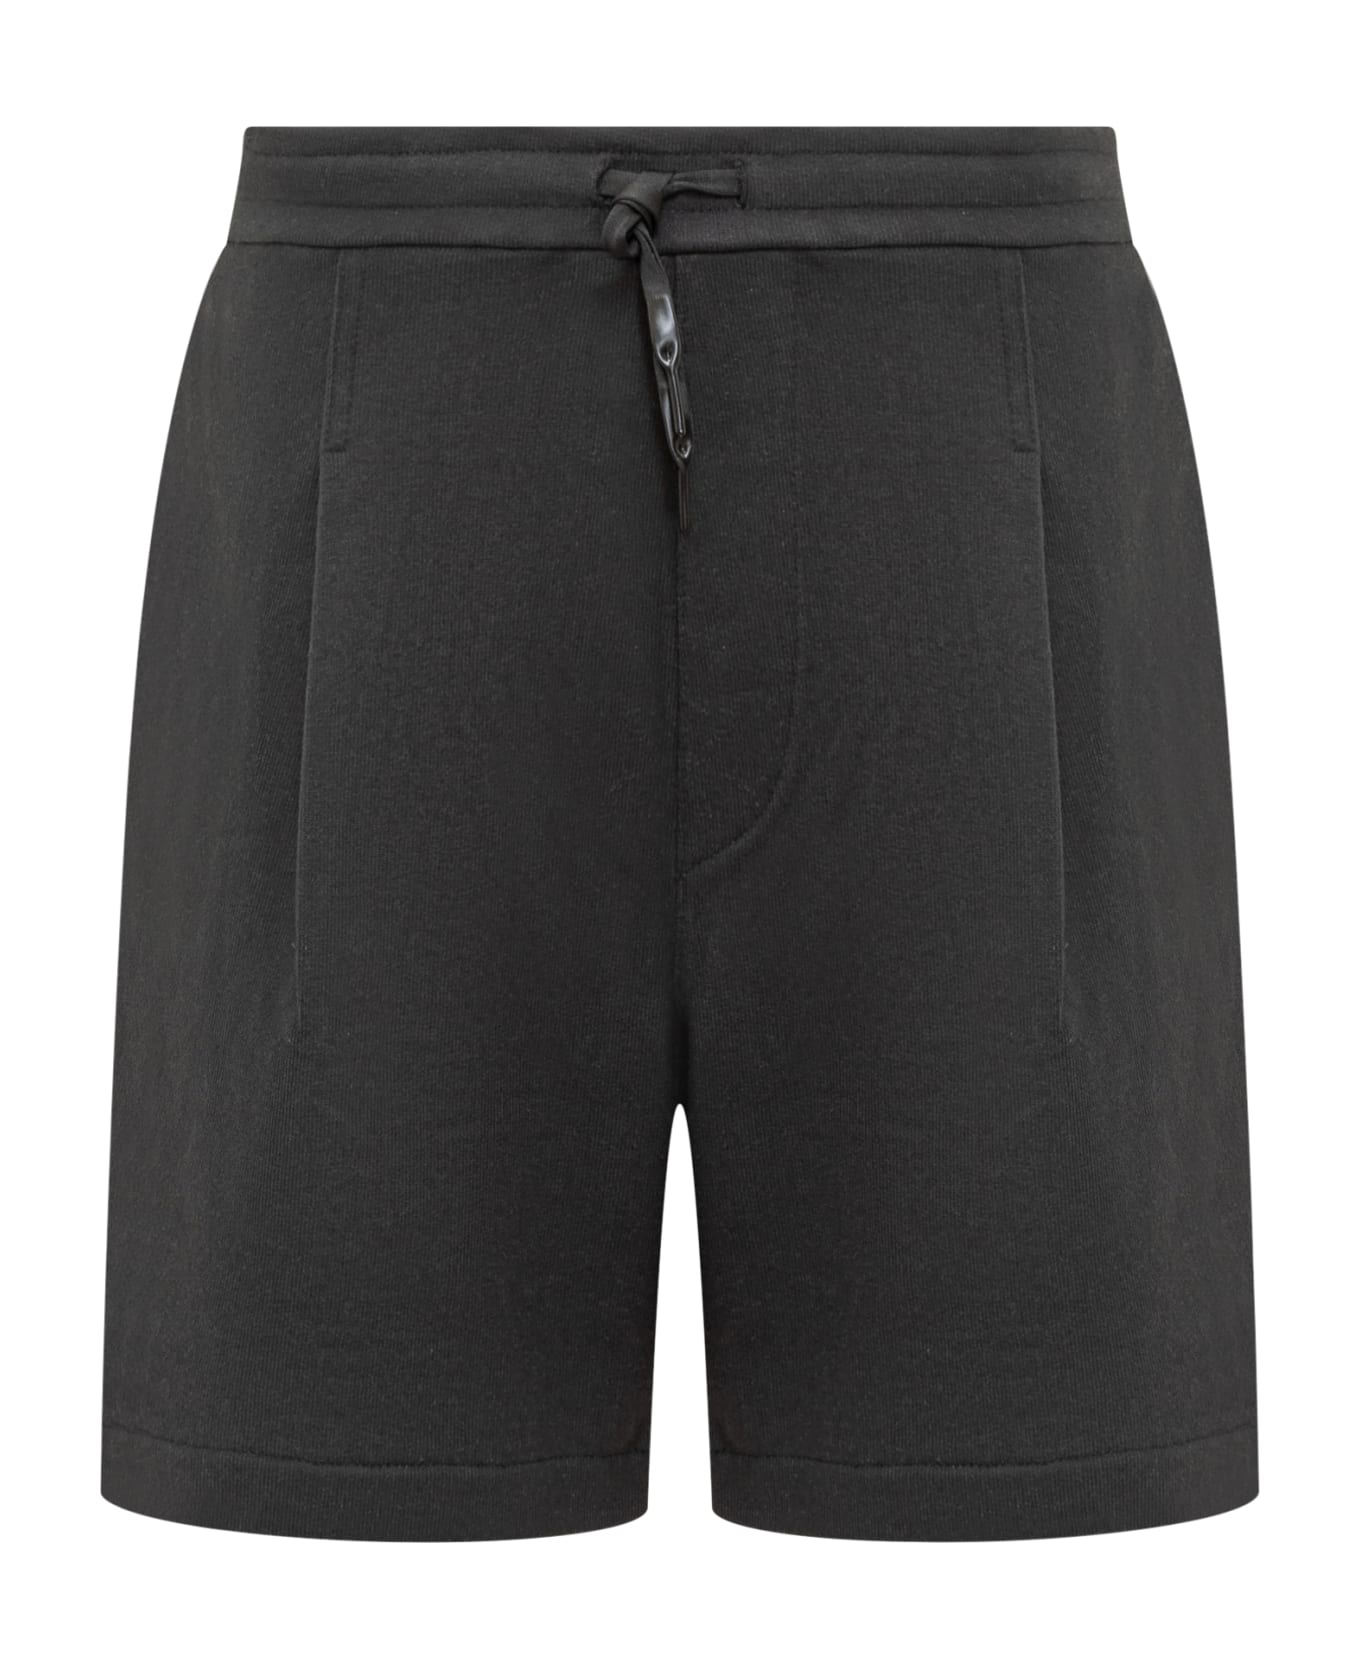 A Paper Kid Sweat Short Pants With Darts. - BLACK